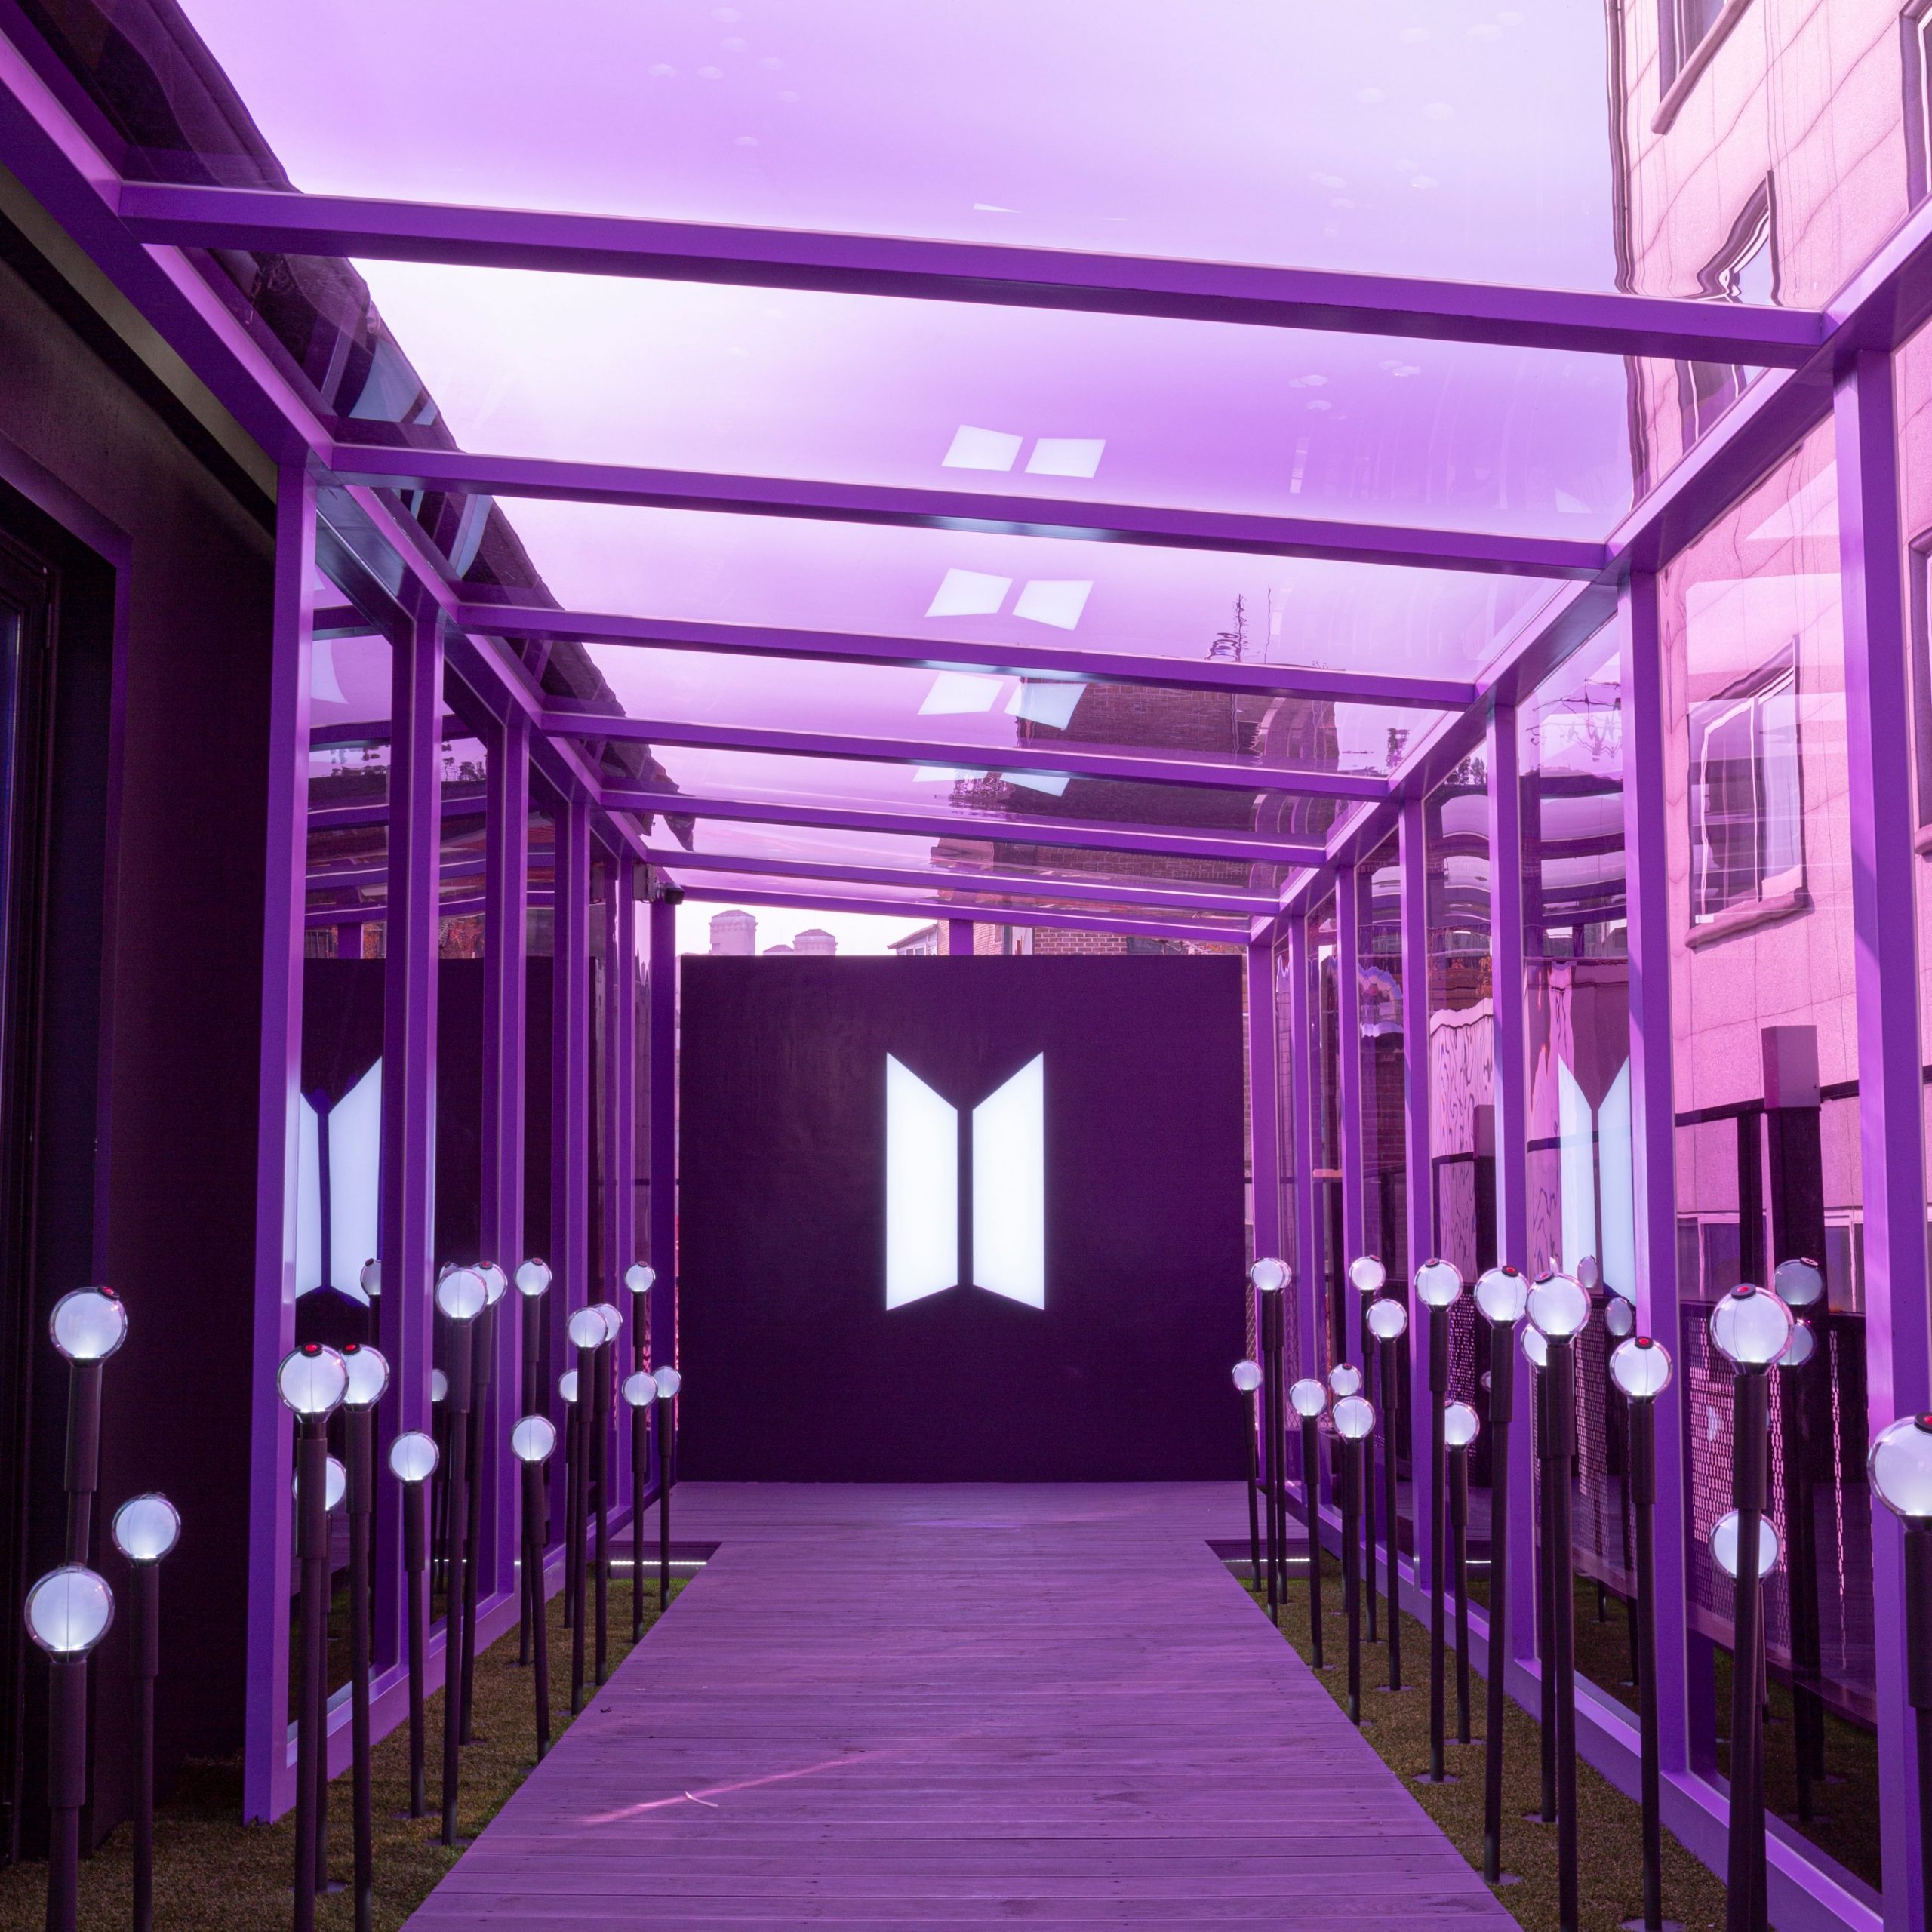  BTS  pop  up  store  to open at Plaza Singapura from Nov 14 